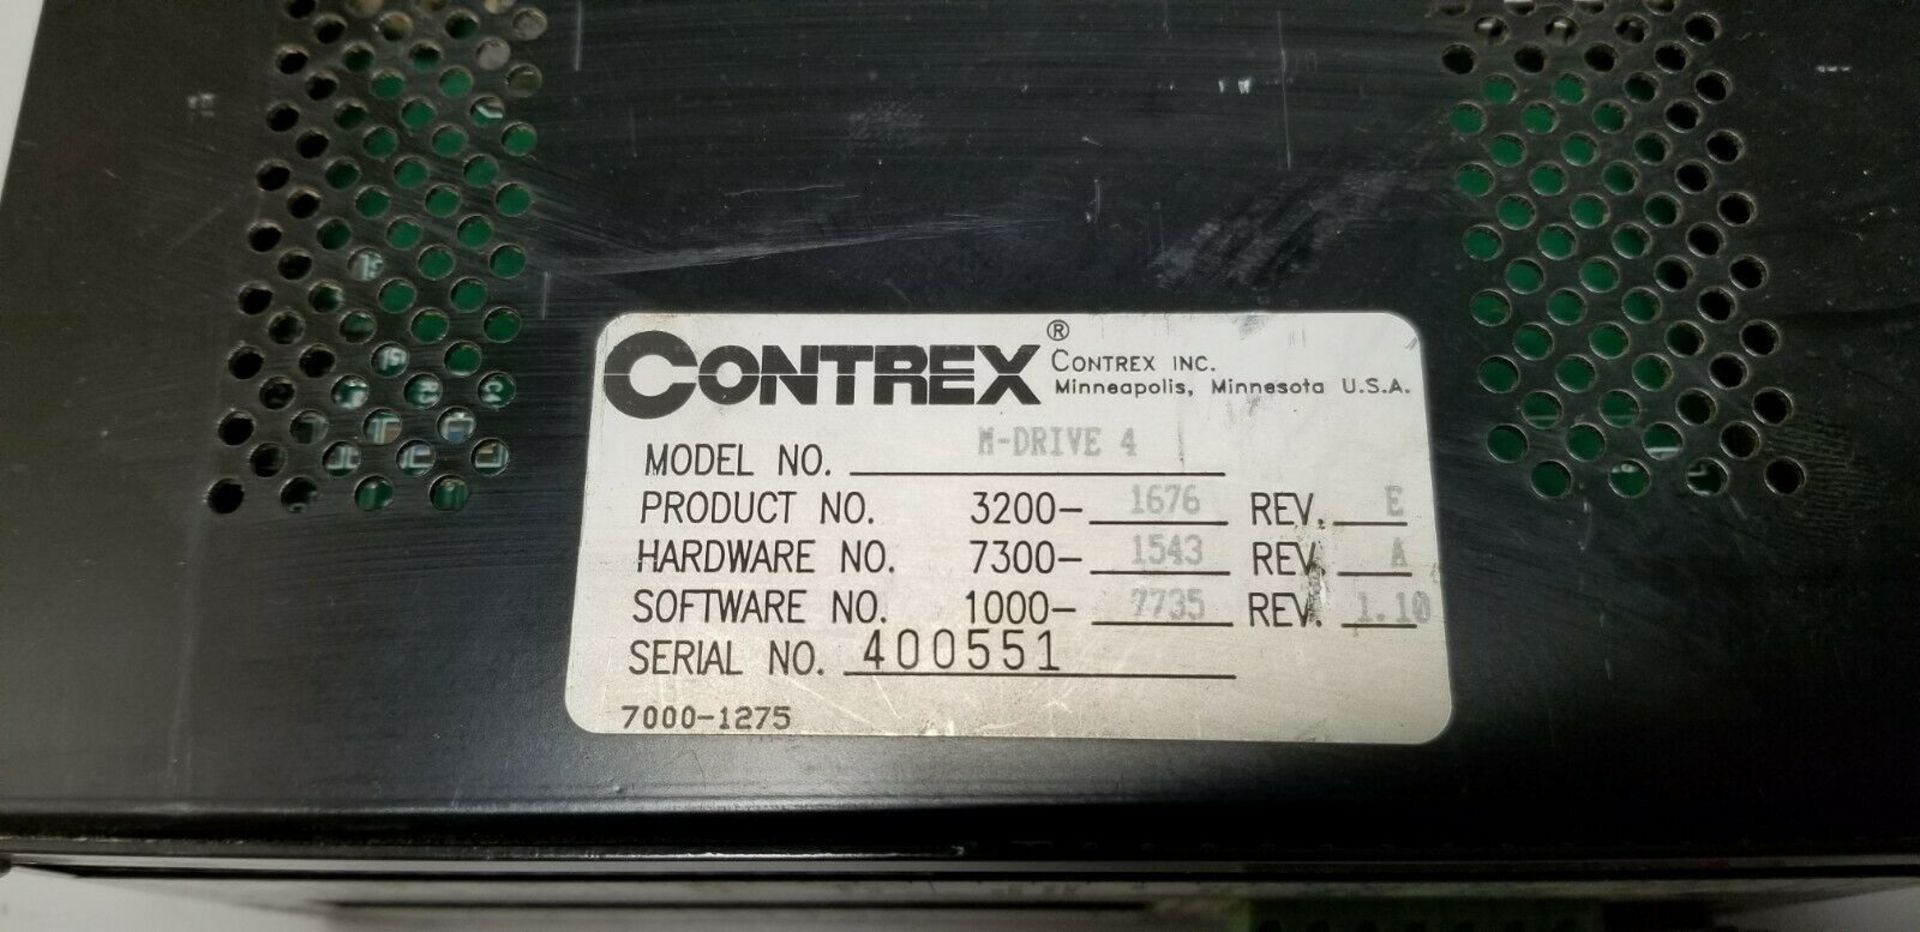 Contrex M-Drive 4 Motor Speed Controller Plus DC Drive - Image 4 of 4